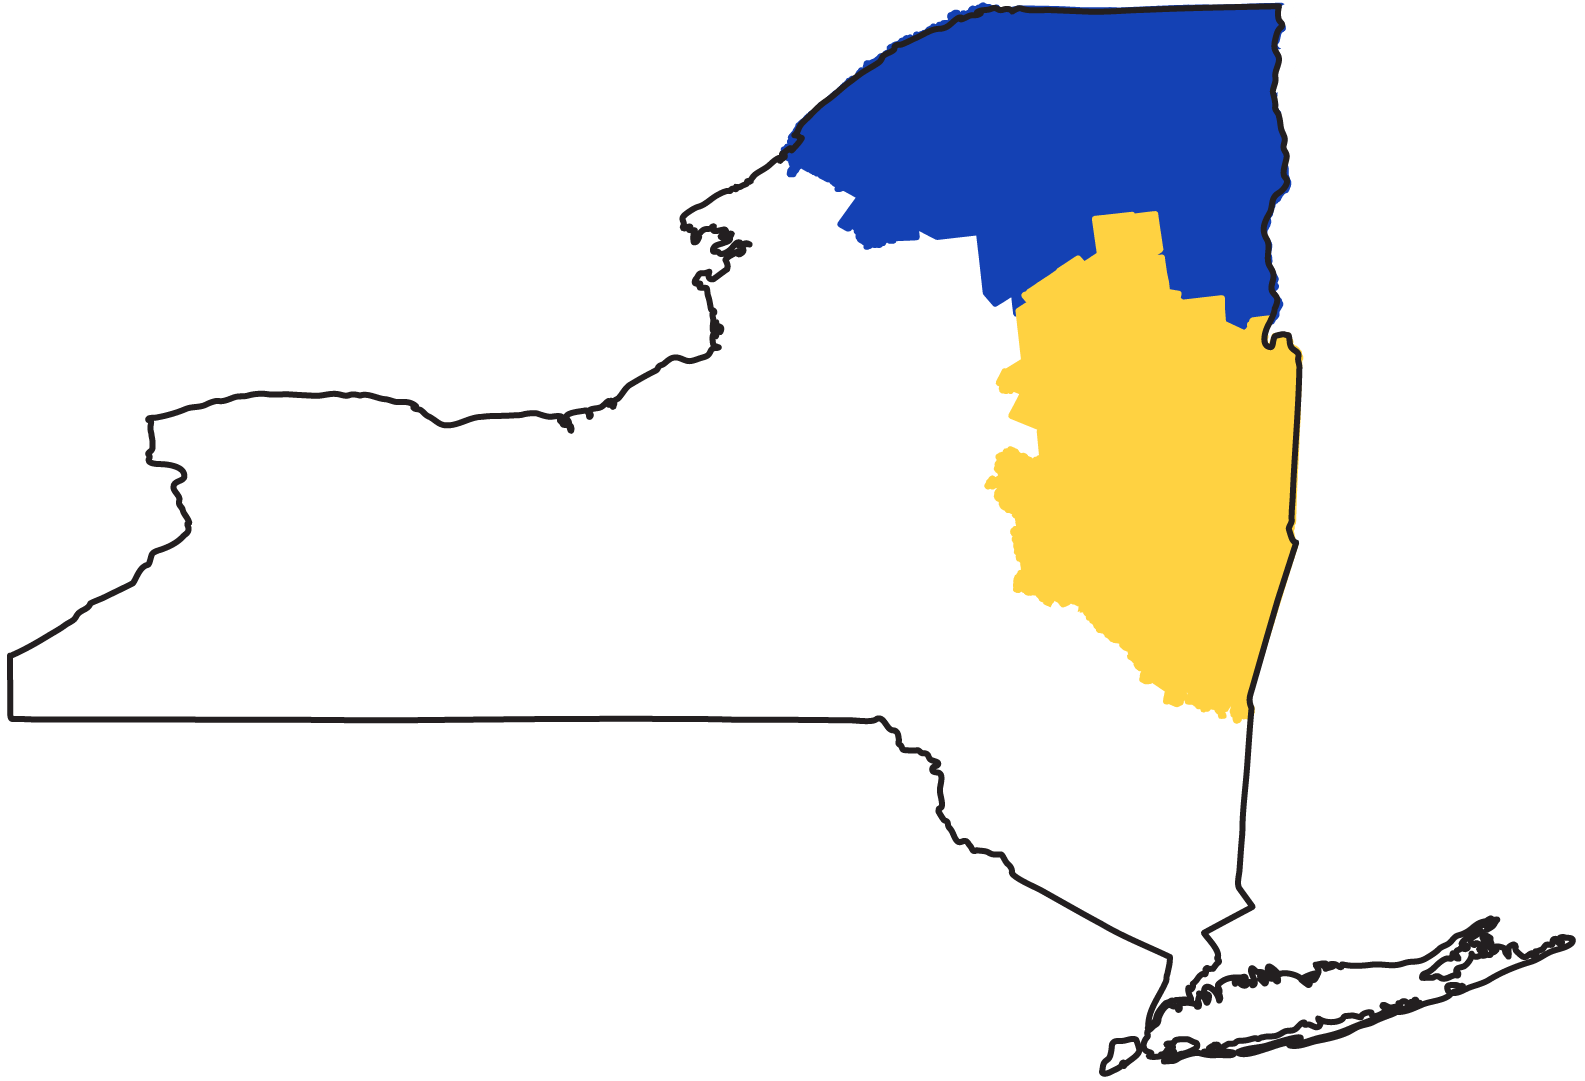 New York State map highlighting the Capital District region